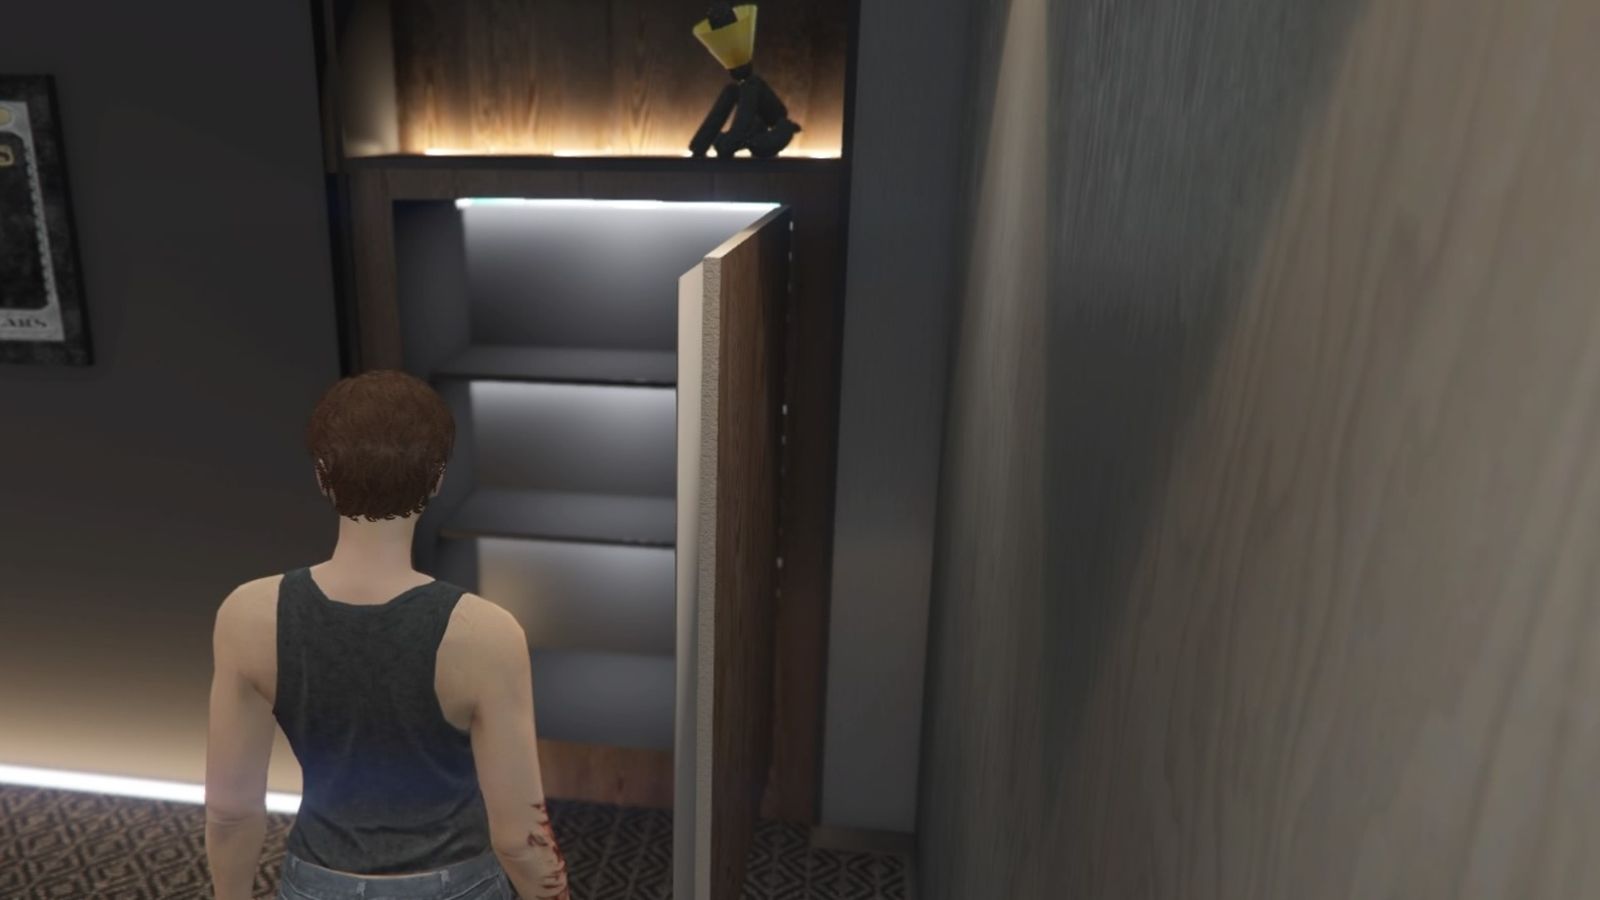 GTA Online The Contract The player is standing in front of their open wall safe inside The Agency